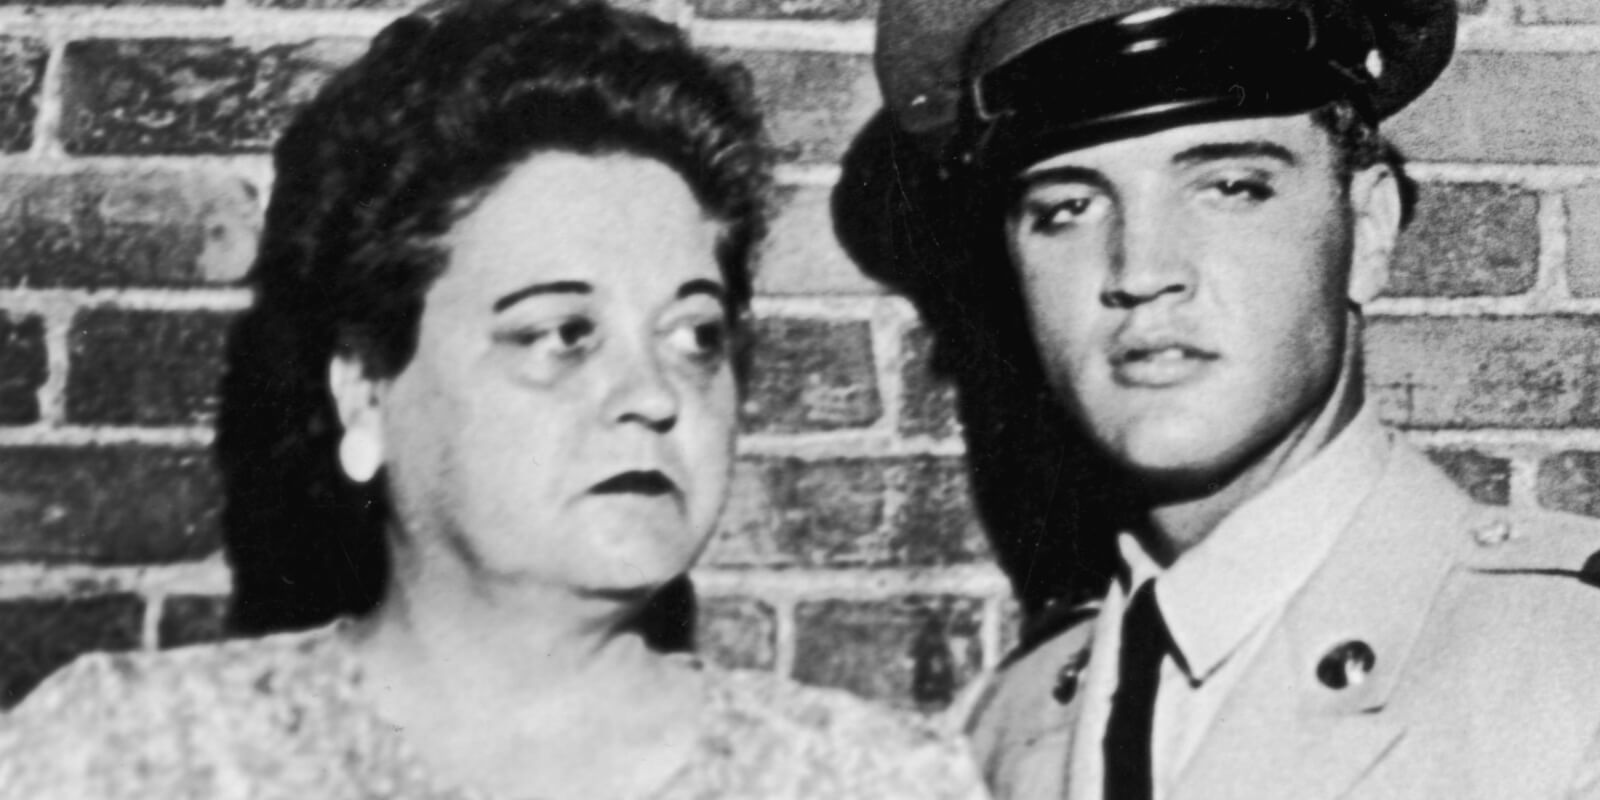 Gladys Presley and Elvis Presley pose in 1958 after he returned home to Graceland from Germany, where he was stationed in the United States Army.